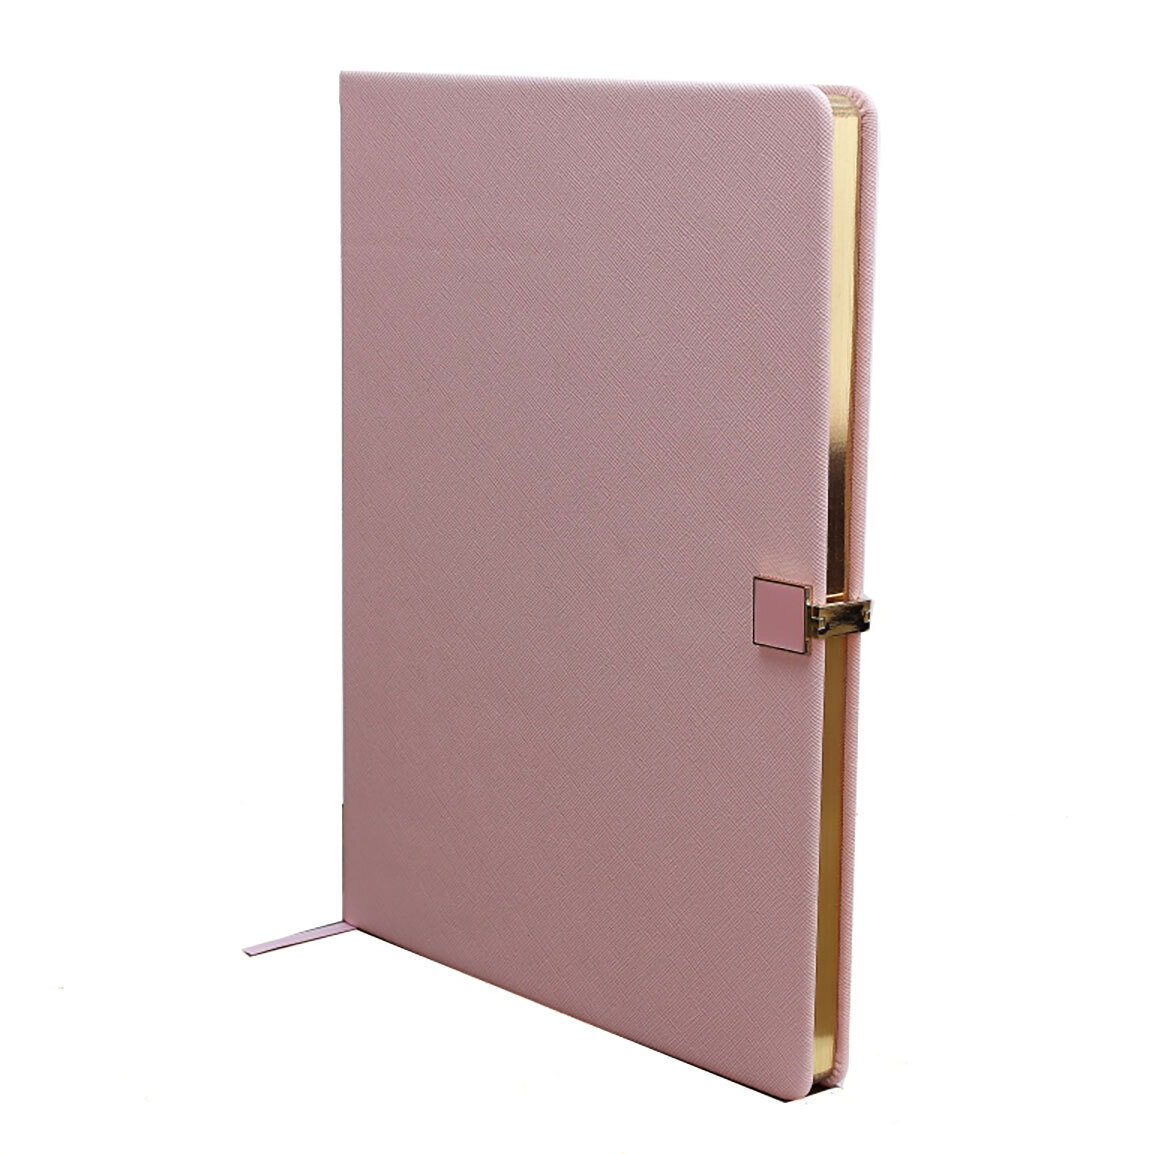 Addison Ross Pink & Gold A4 Notebook A4 Inch Pu Leather NB1153